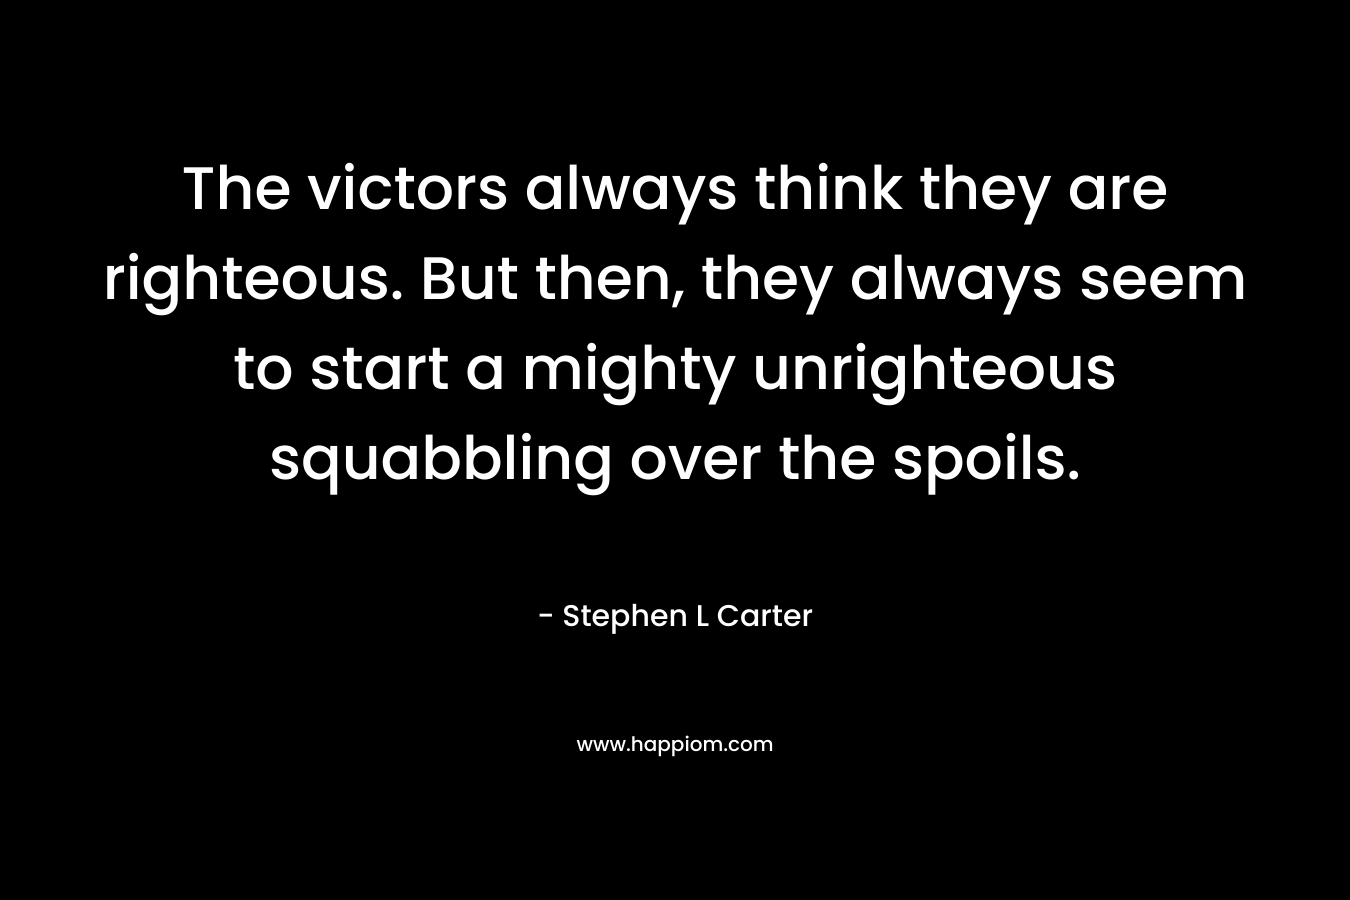 The victors always think they are righteous. But then, they always seem to start a mighty unrighteous squabbling over the spoils. – Stephen L Carter